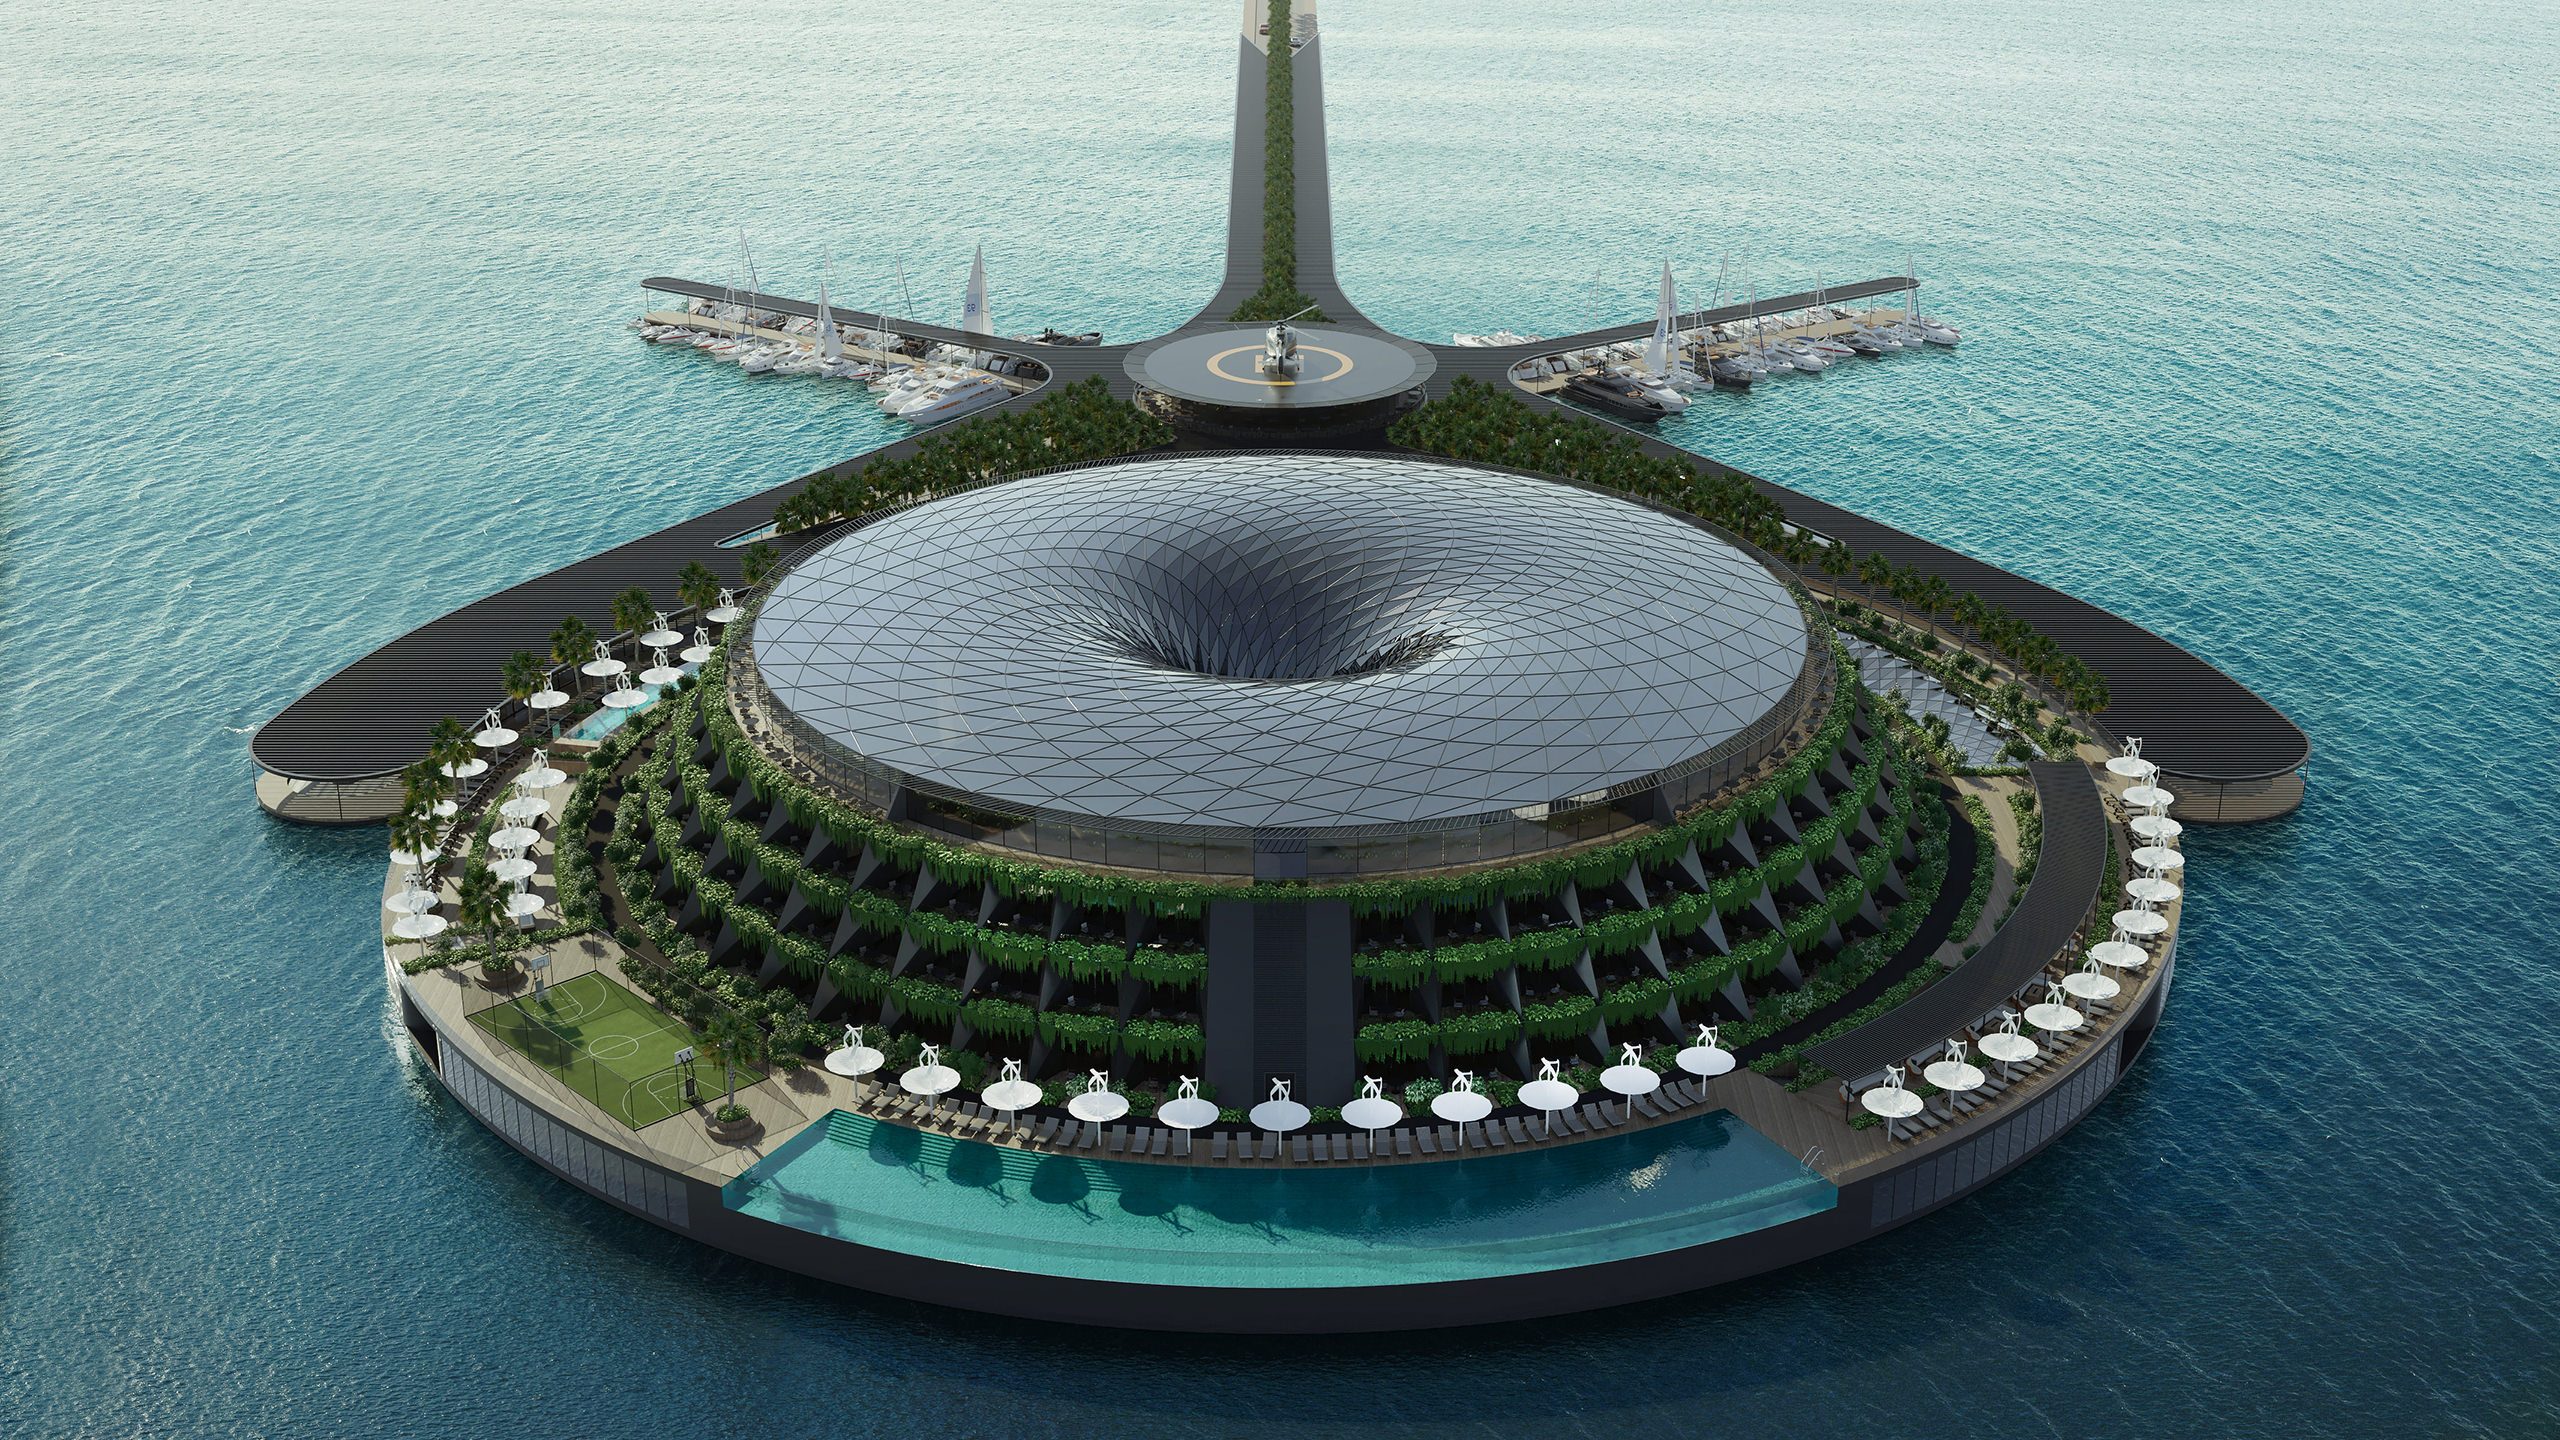 Qatar set for ‘rotating, eco-floating’ hotel by 2025